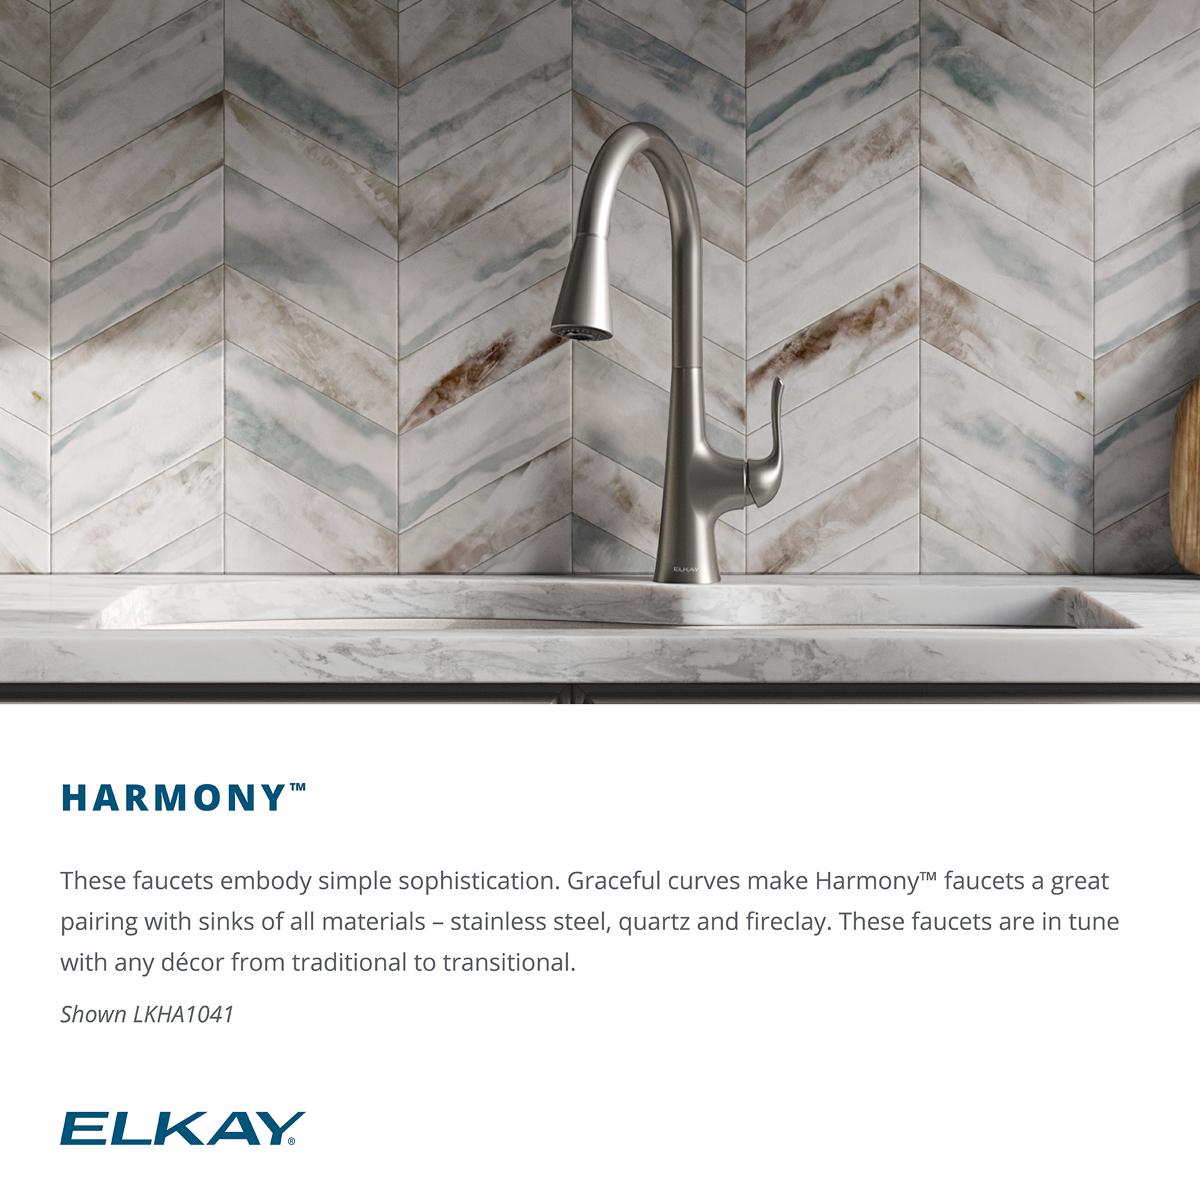 Elkay Harmony Chrome Single Handle Pull-down Kitchen Faucet with Sprayer Function